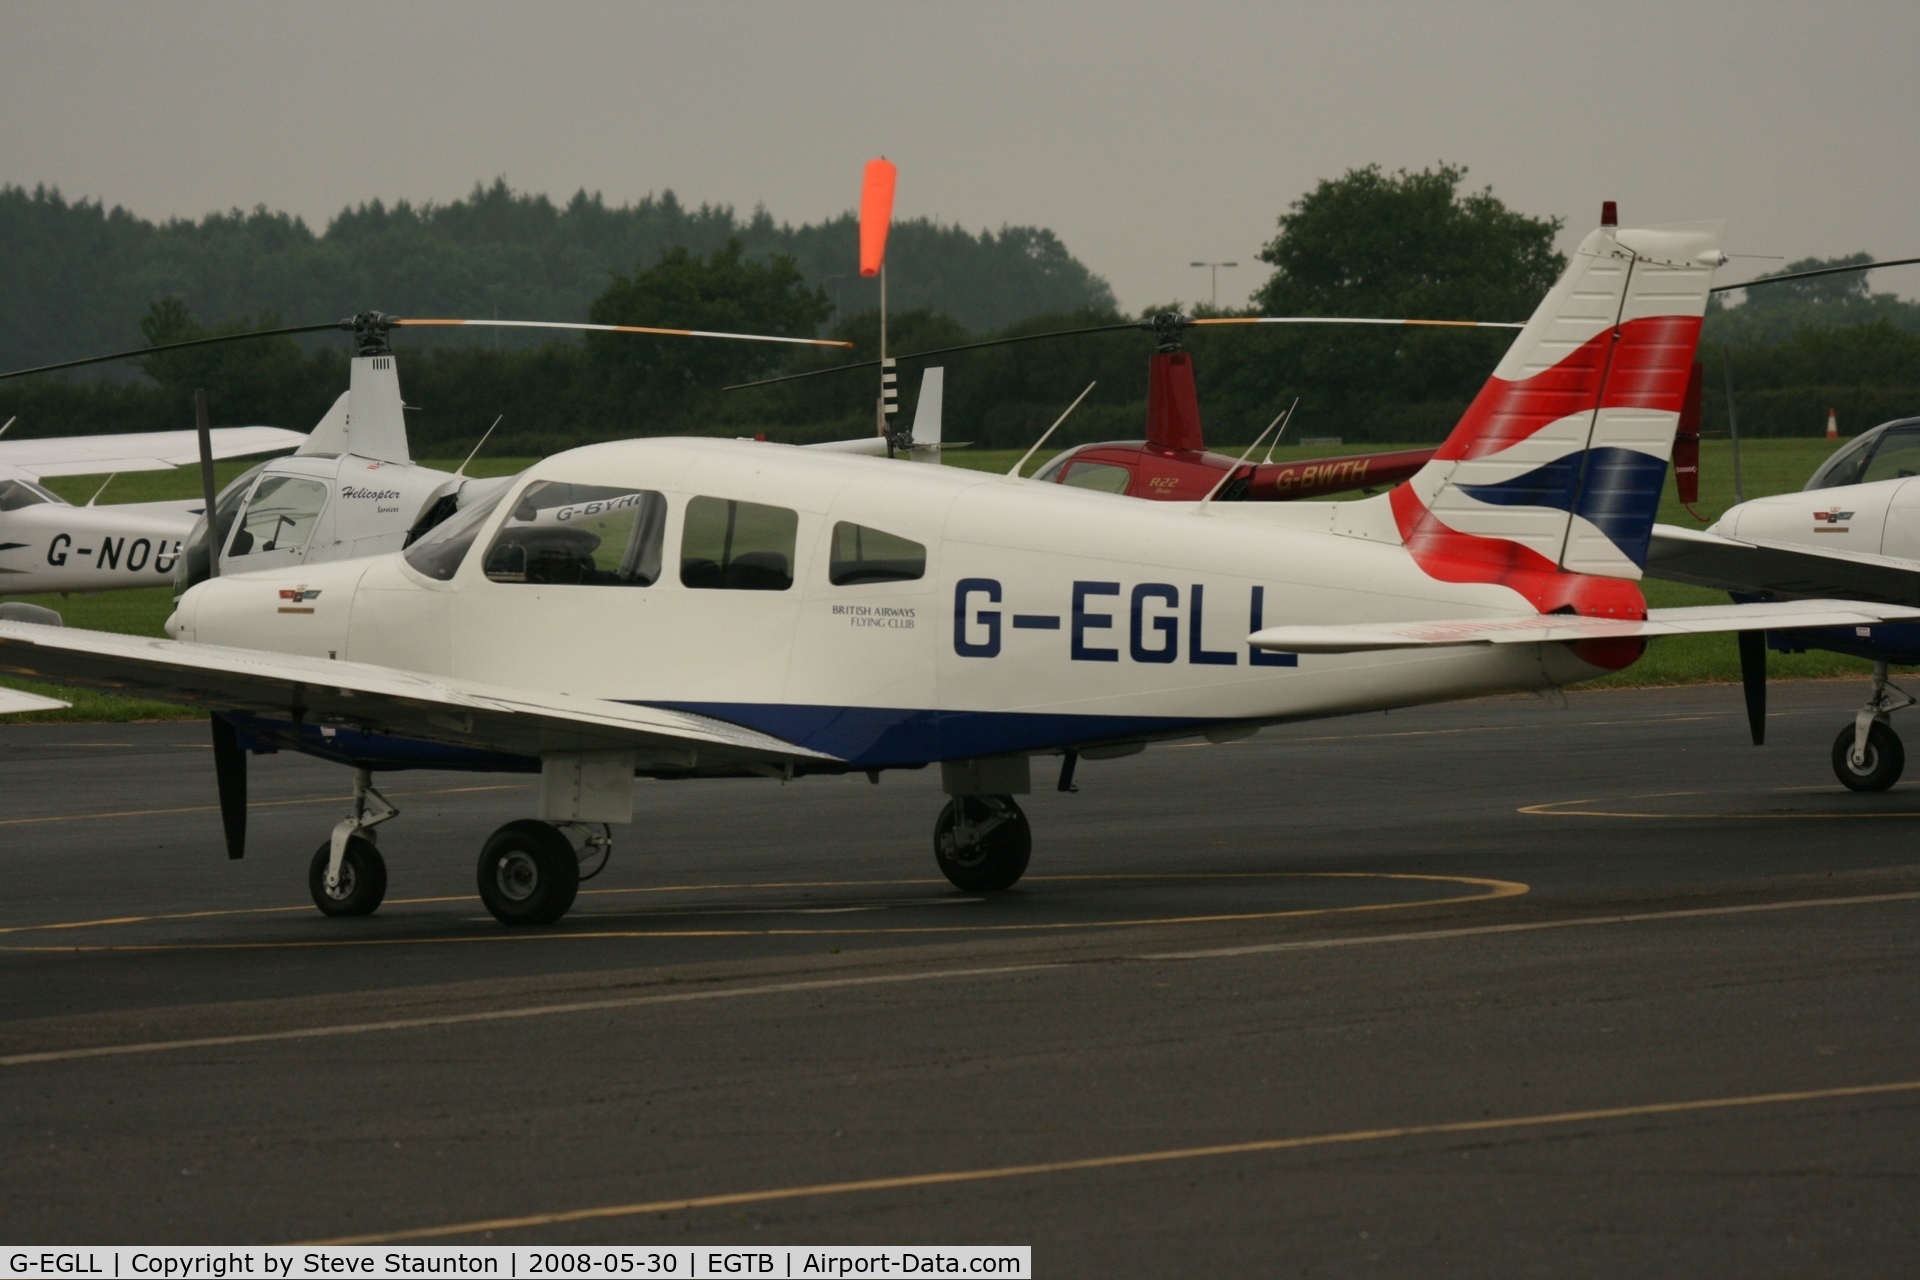 G-EGLL, 1977 Piper PA-28-161 Cherokee Warrior II C/N 28-7816257, Taken at Wycombe Air Park using my new Sigma 50 to 500 APO DG HSM lens (The Beast)